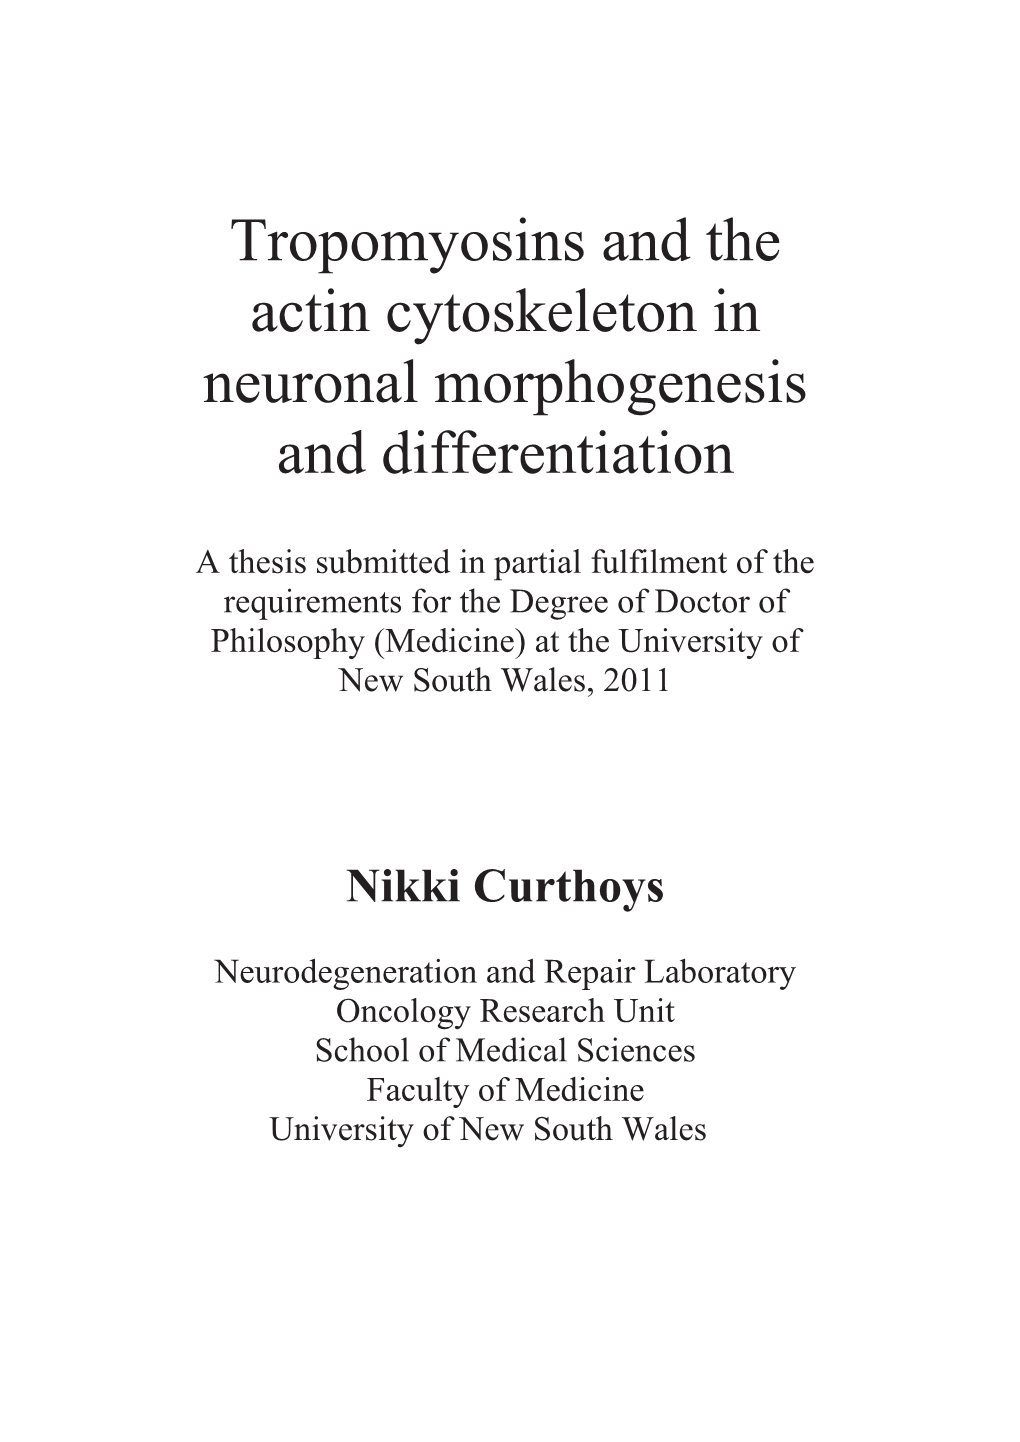 Tropomyosins and the Actin Cytoskeleton in Neuronal Morphogenesis and Differentiation